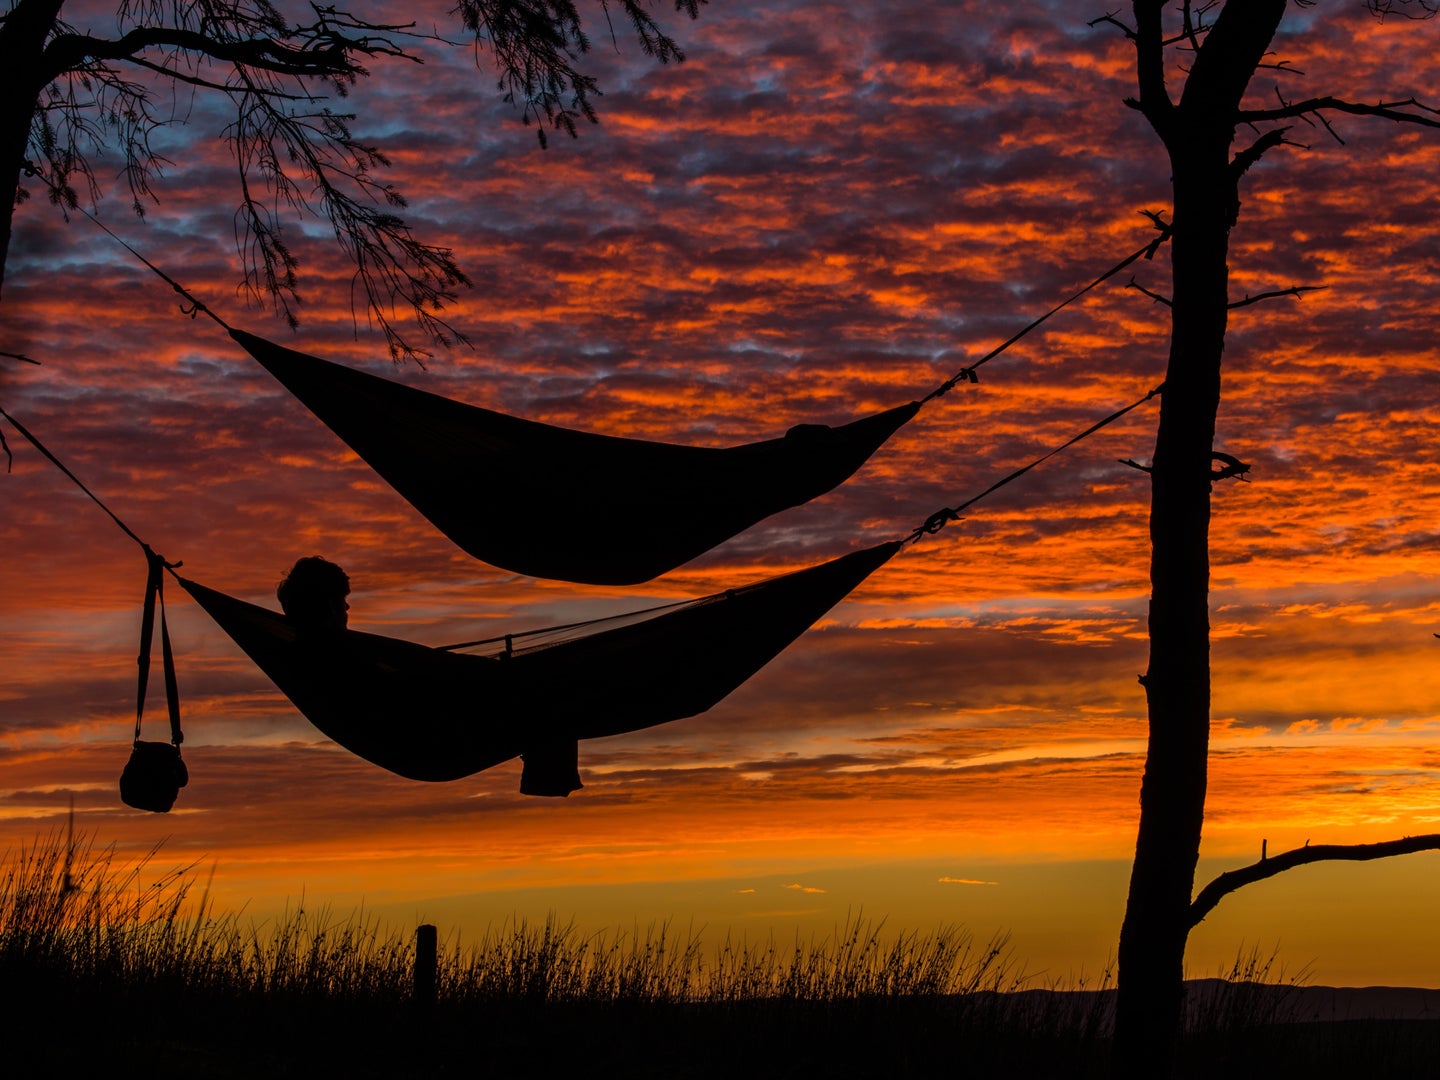 A person in a hammock between two trees, with another hammock above him, on a shoreline at sunset.